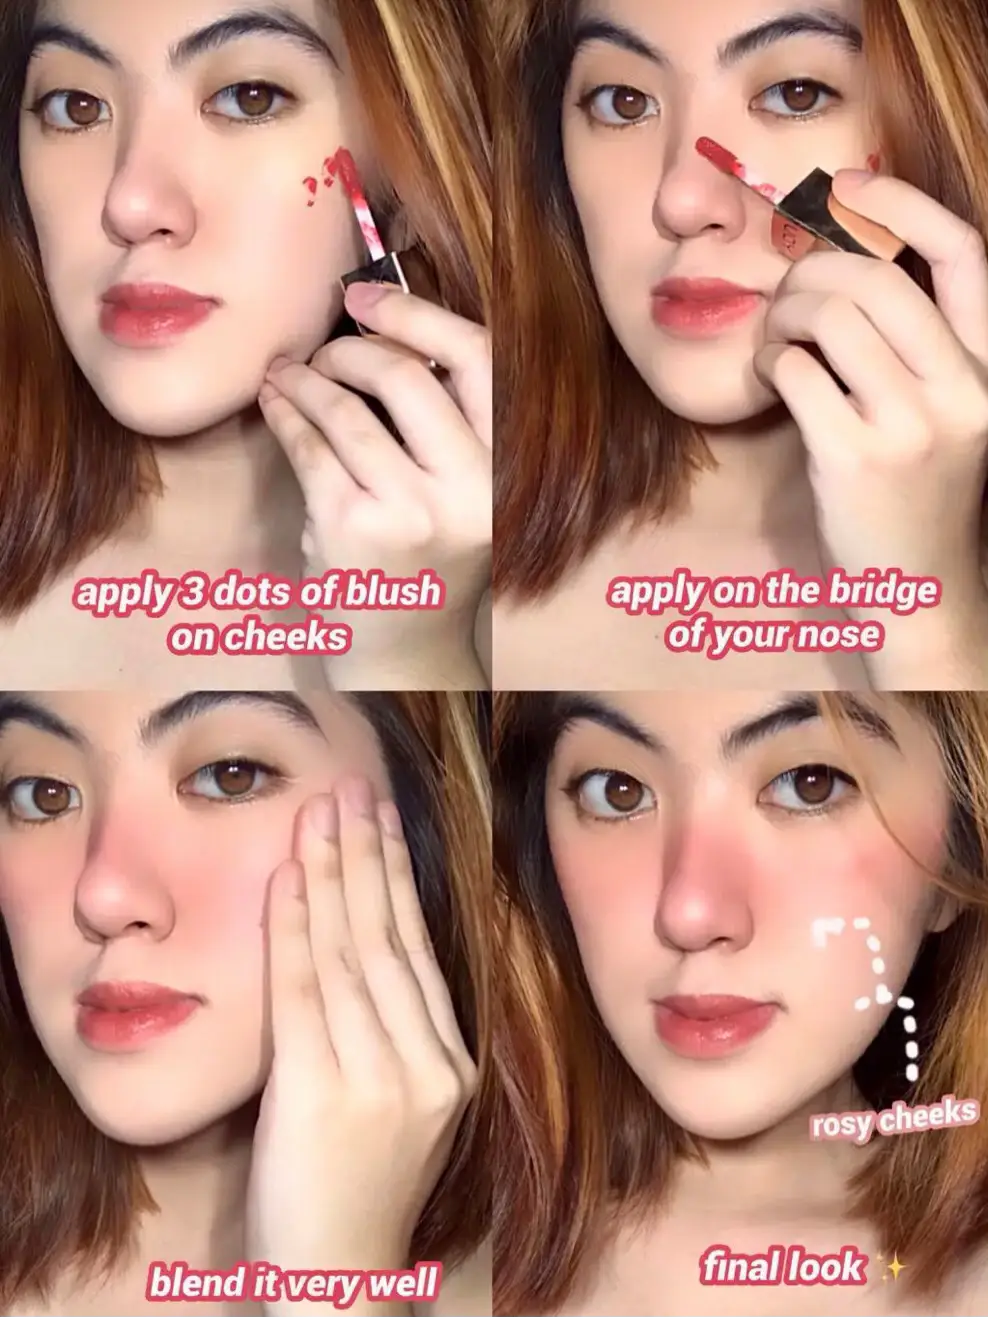 rosy & dewy makeup tutorial 🌹  Gallery posted by Britt Minetti